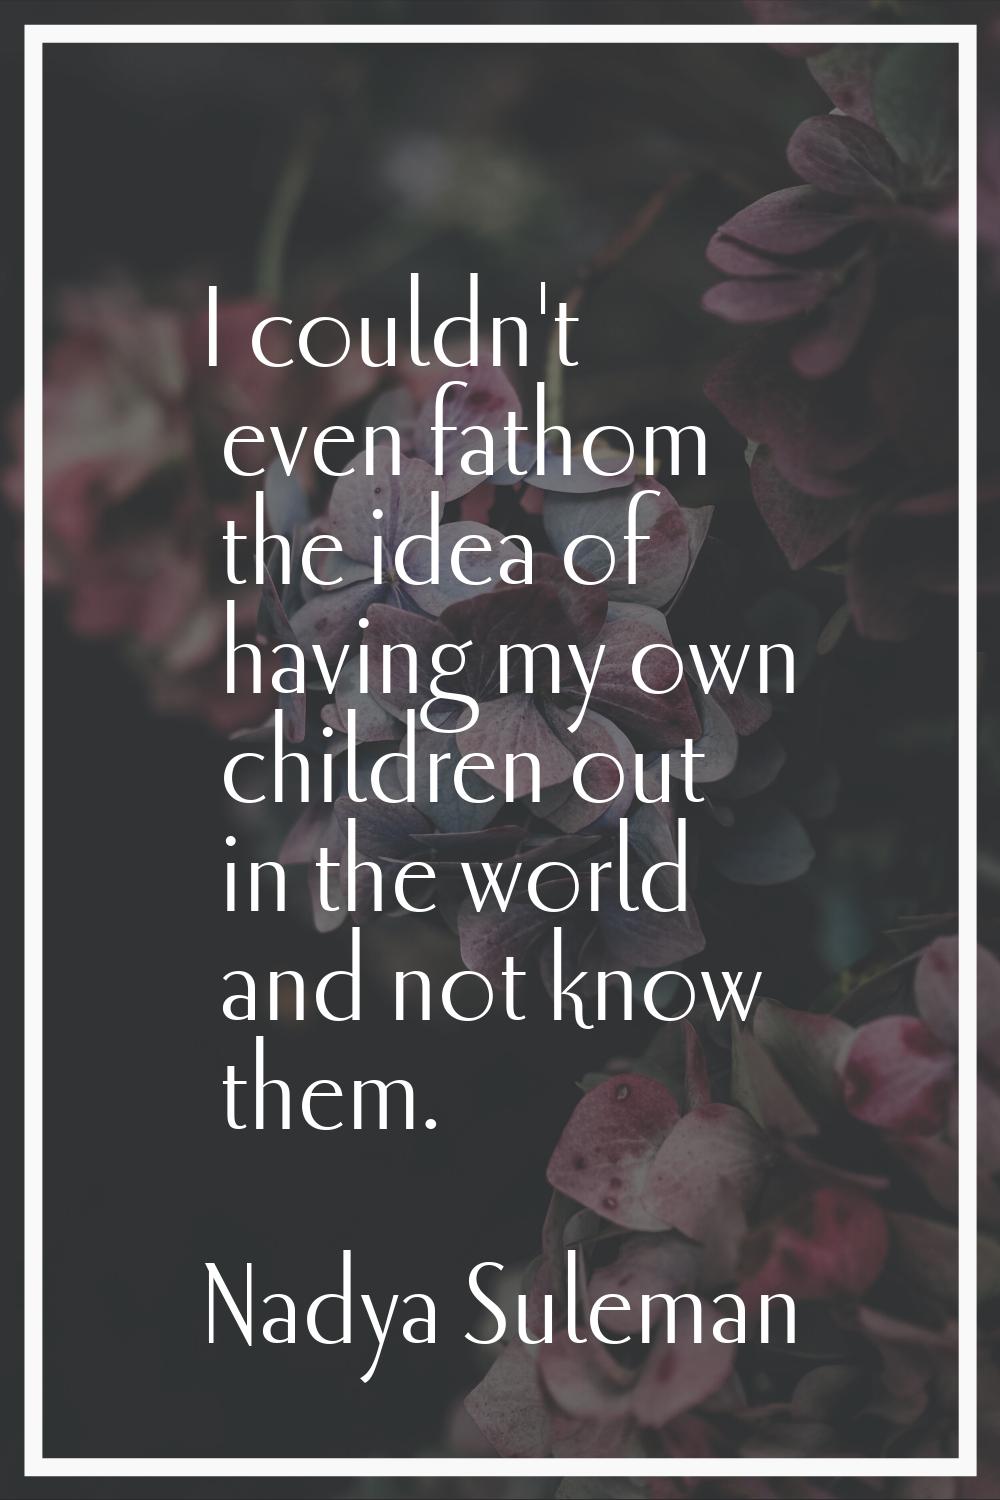 I couldn't even fathom the idea of having my own children out in the world and not know them.